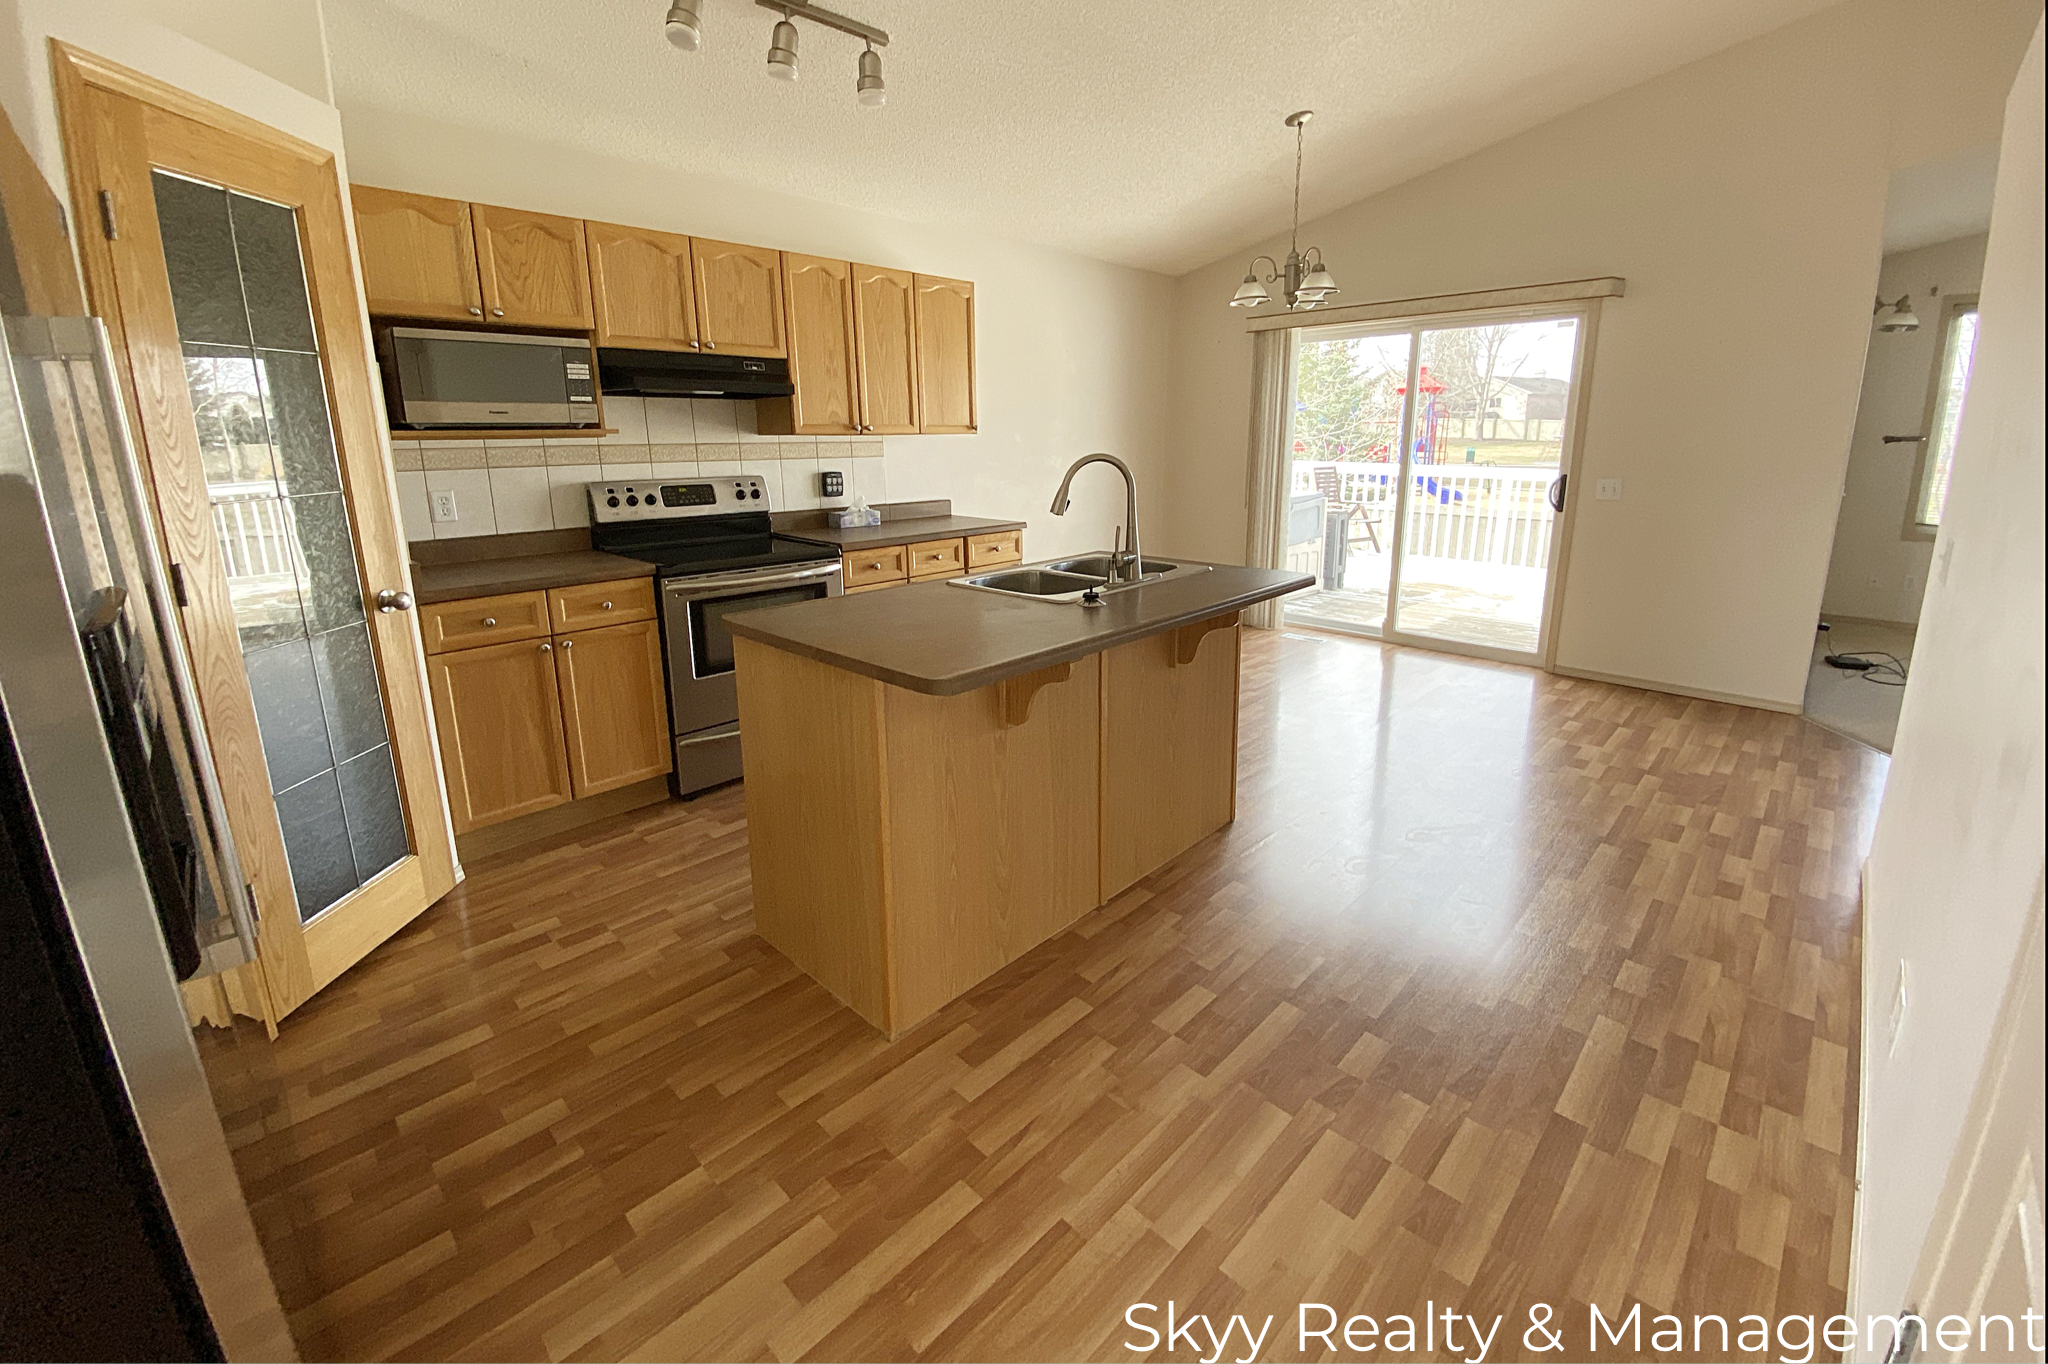 Main Photo: 7 Lansing Close, Spruce Grove: House for rent